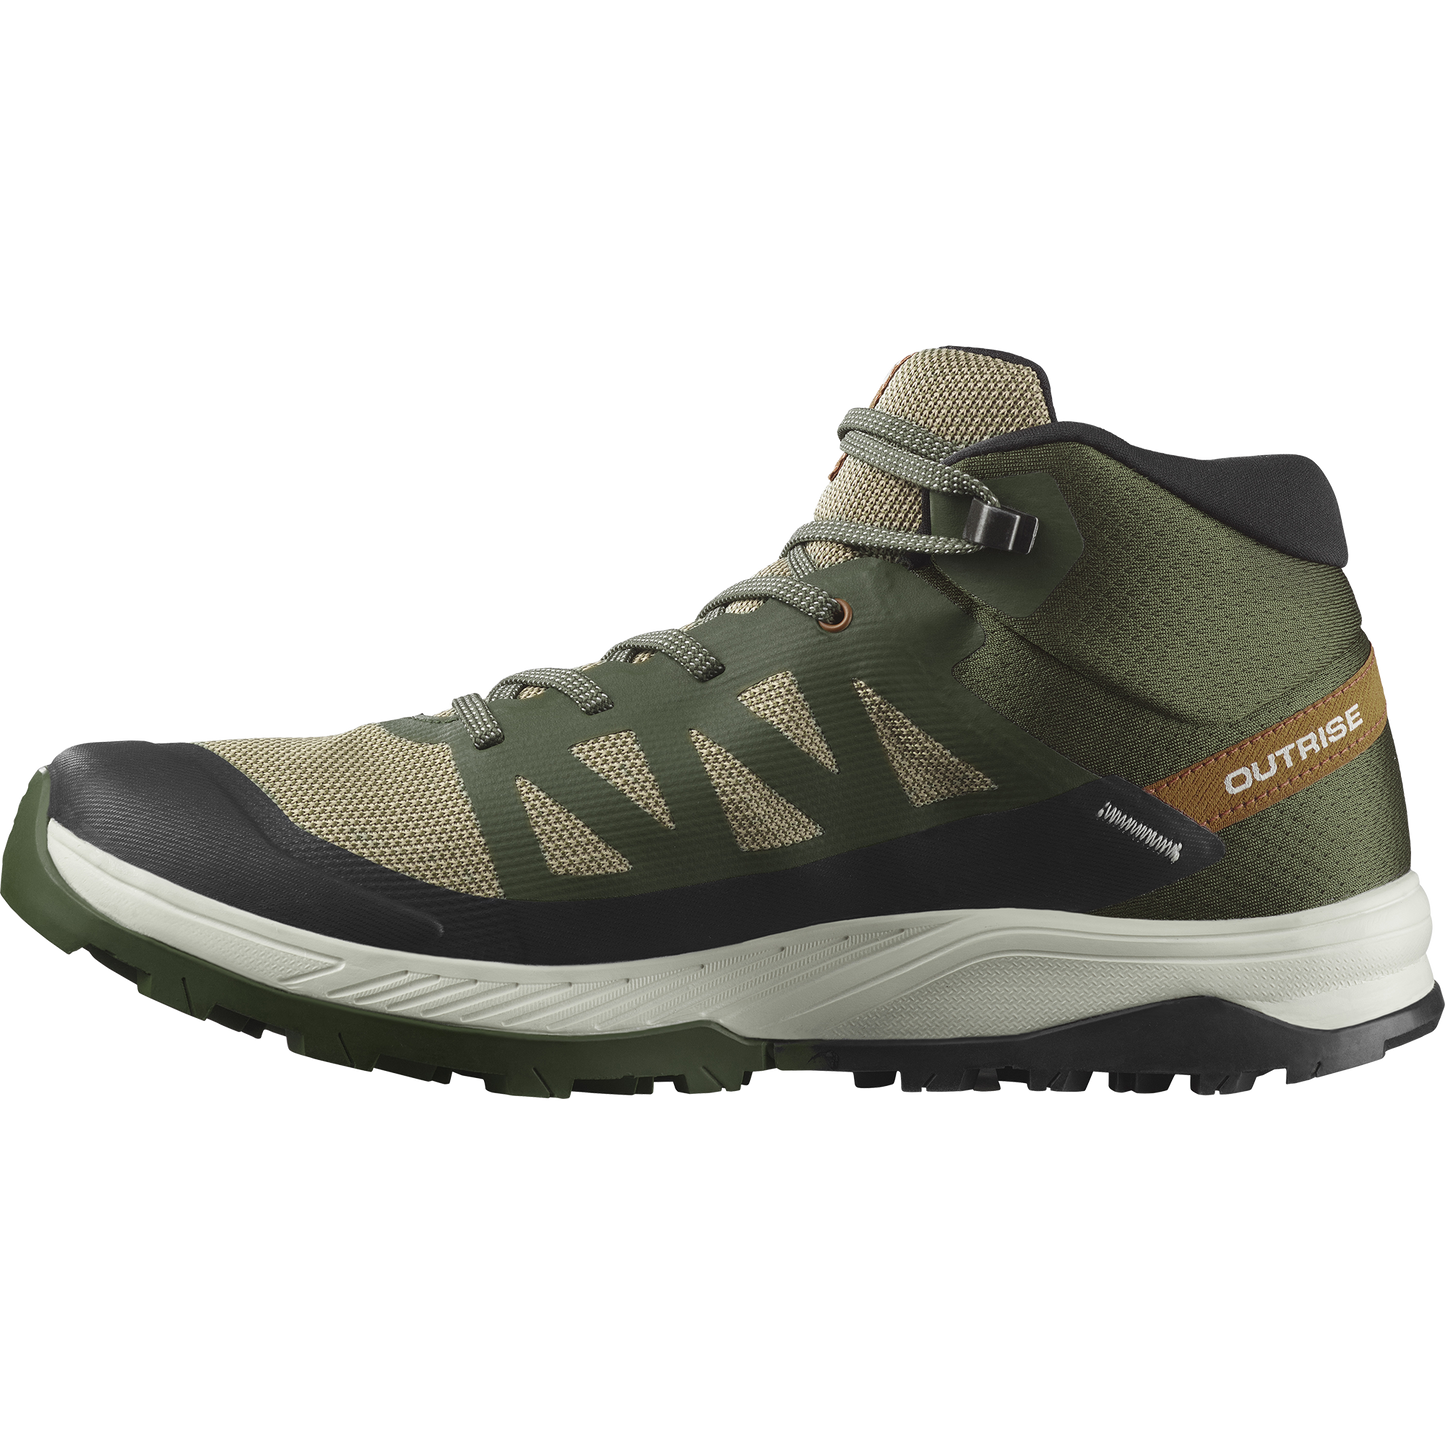 OUTRISE MID GORE-TEX